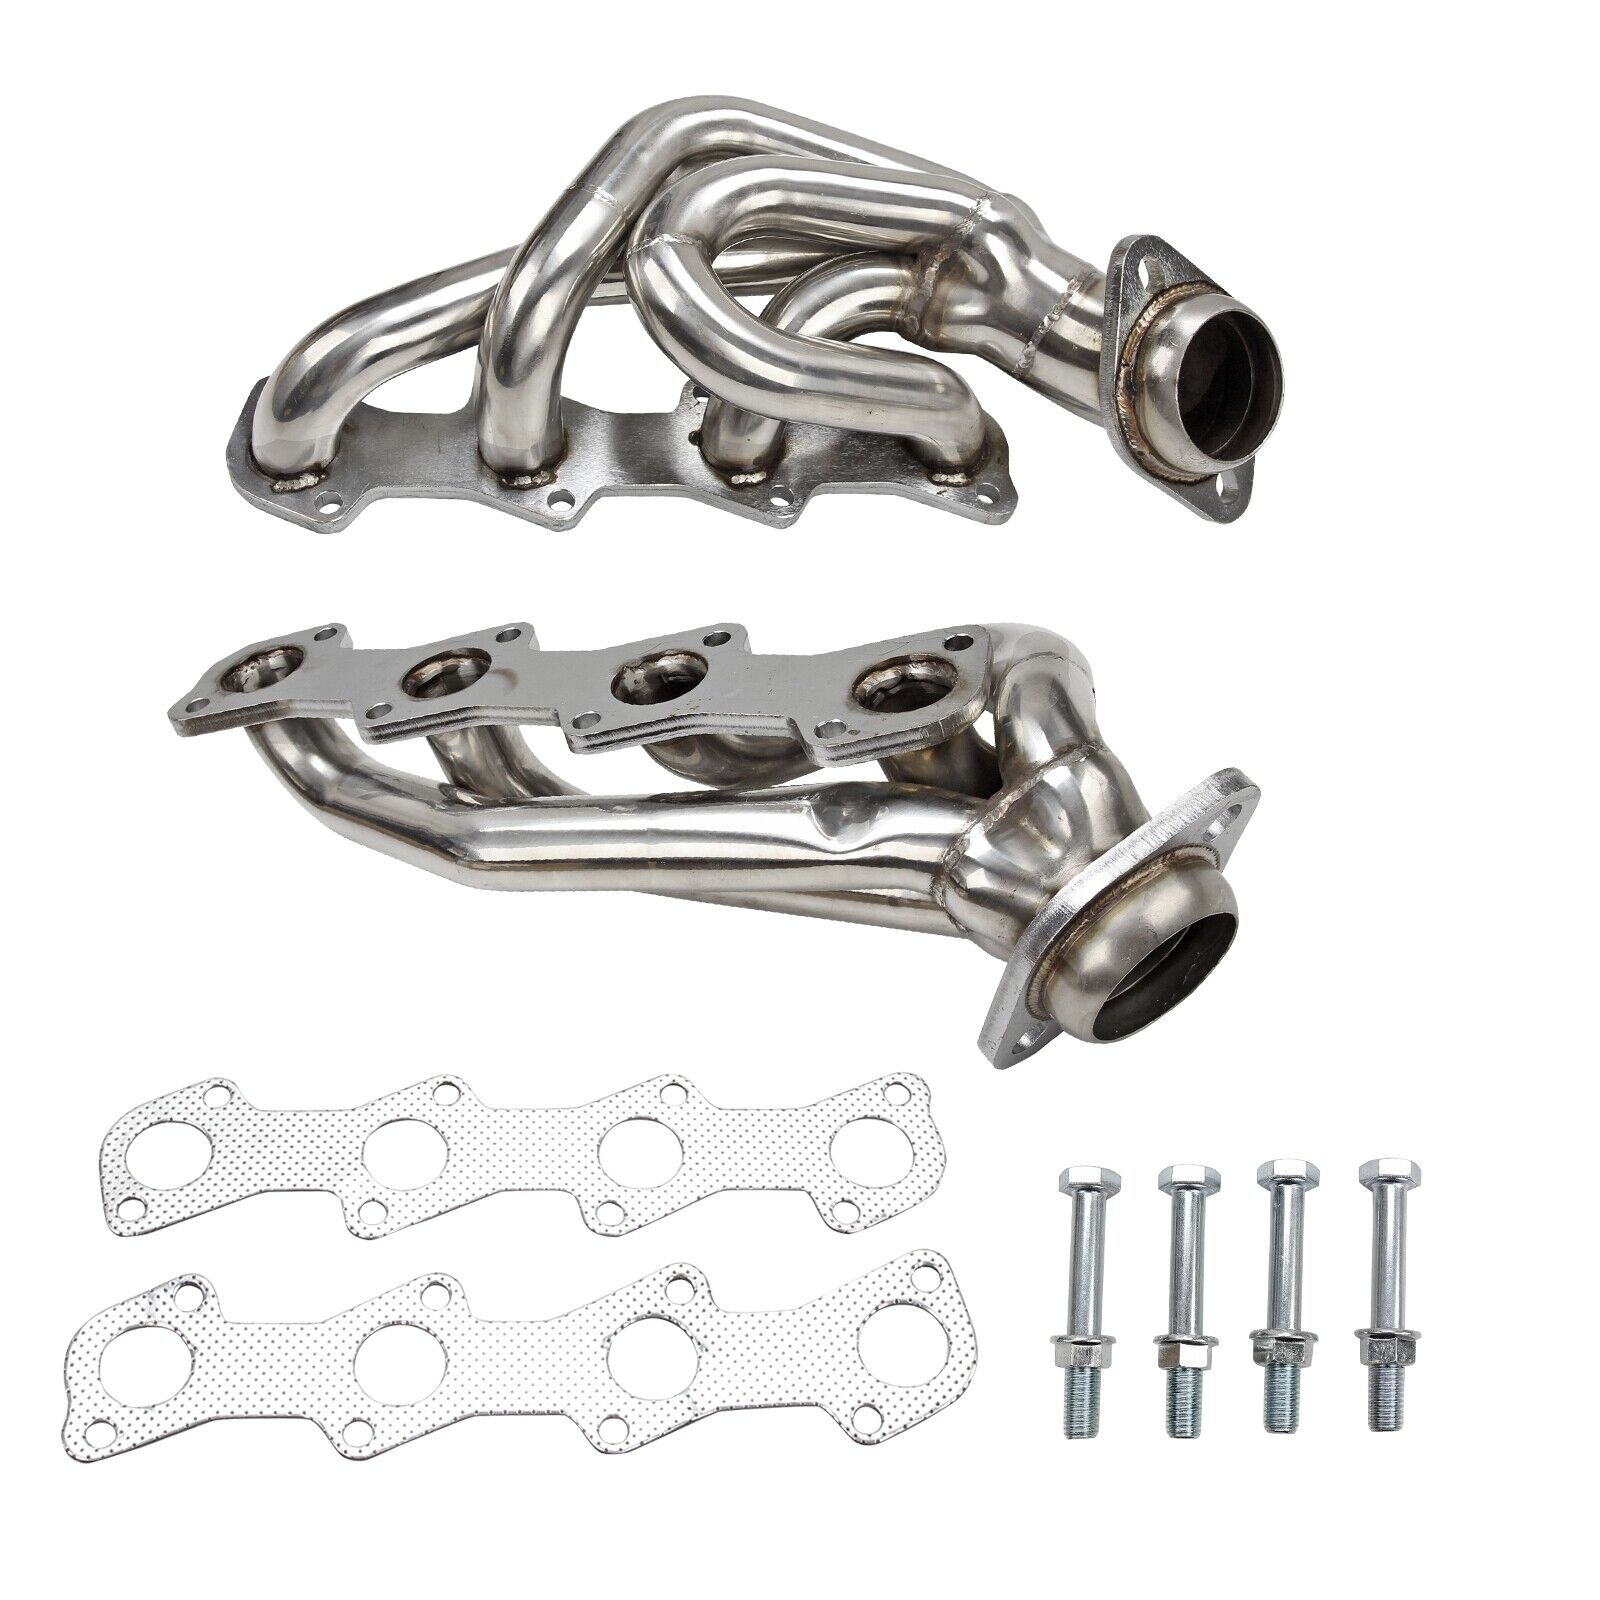 For Ford F150 F250 Expedition 1997-2003 5.4L V8 Shorty Manifold Header